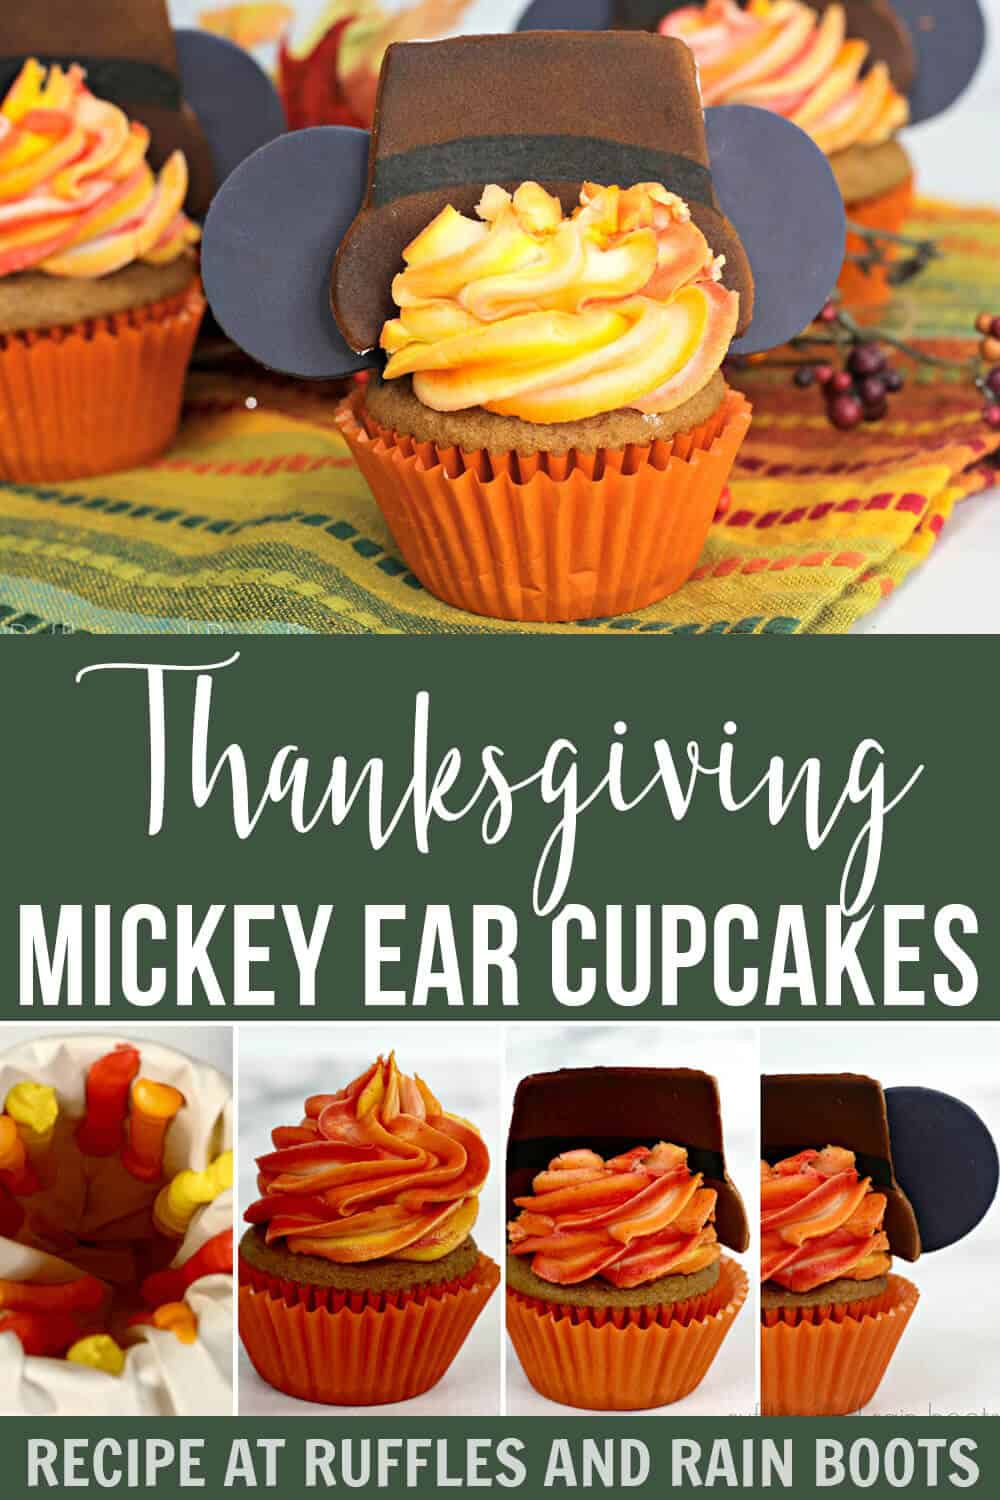 collage of Thanksgiving dessert mini cakes on fall background with spice cake cupcakes and text which reads Thanksgiving mickey ear cupcakes